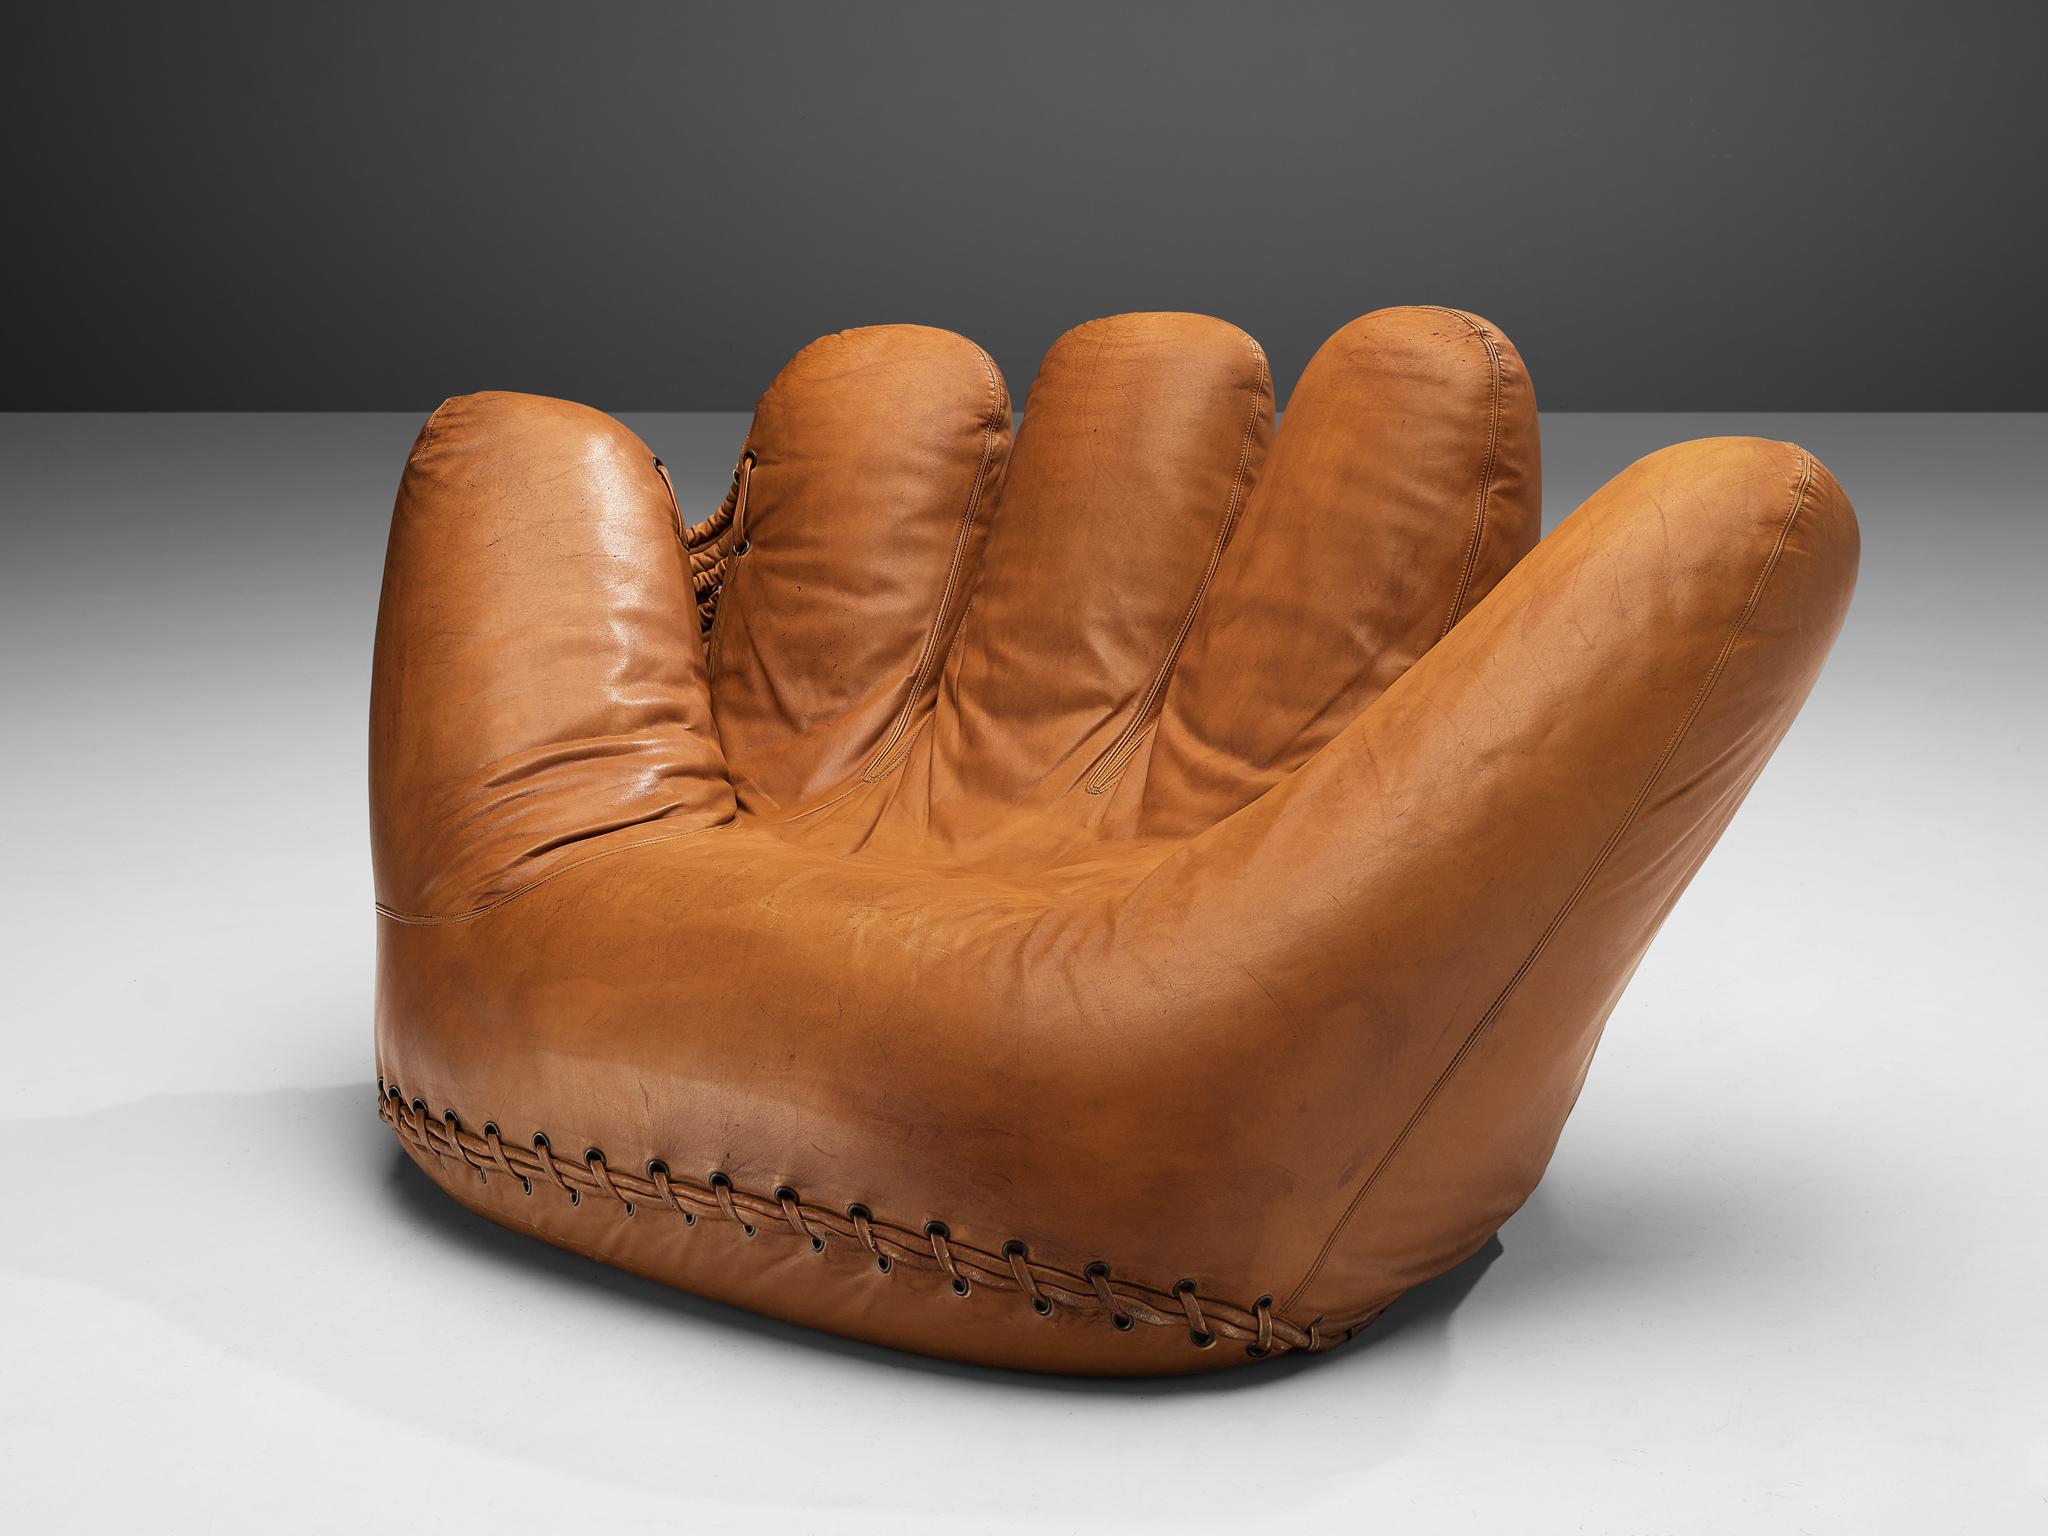 Gionathan de Pas & Donato D'Urbino and Paolo Lomazzi for Poltronova, glove chair, cognac leather, 1970s, Italy.

This extraordinary chair is named the 'Joe Seat' and was dedicated to the legendary baseball champion, Joe DiMaggio, the giant Joe